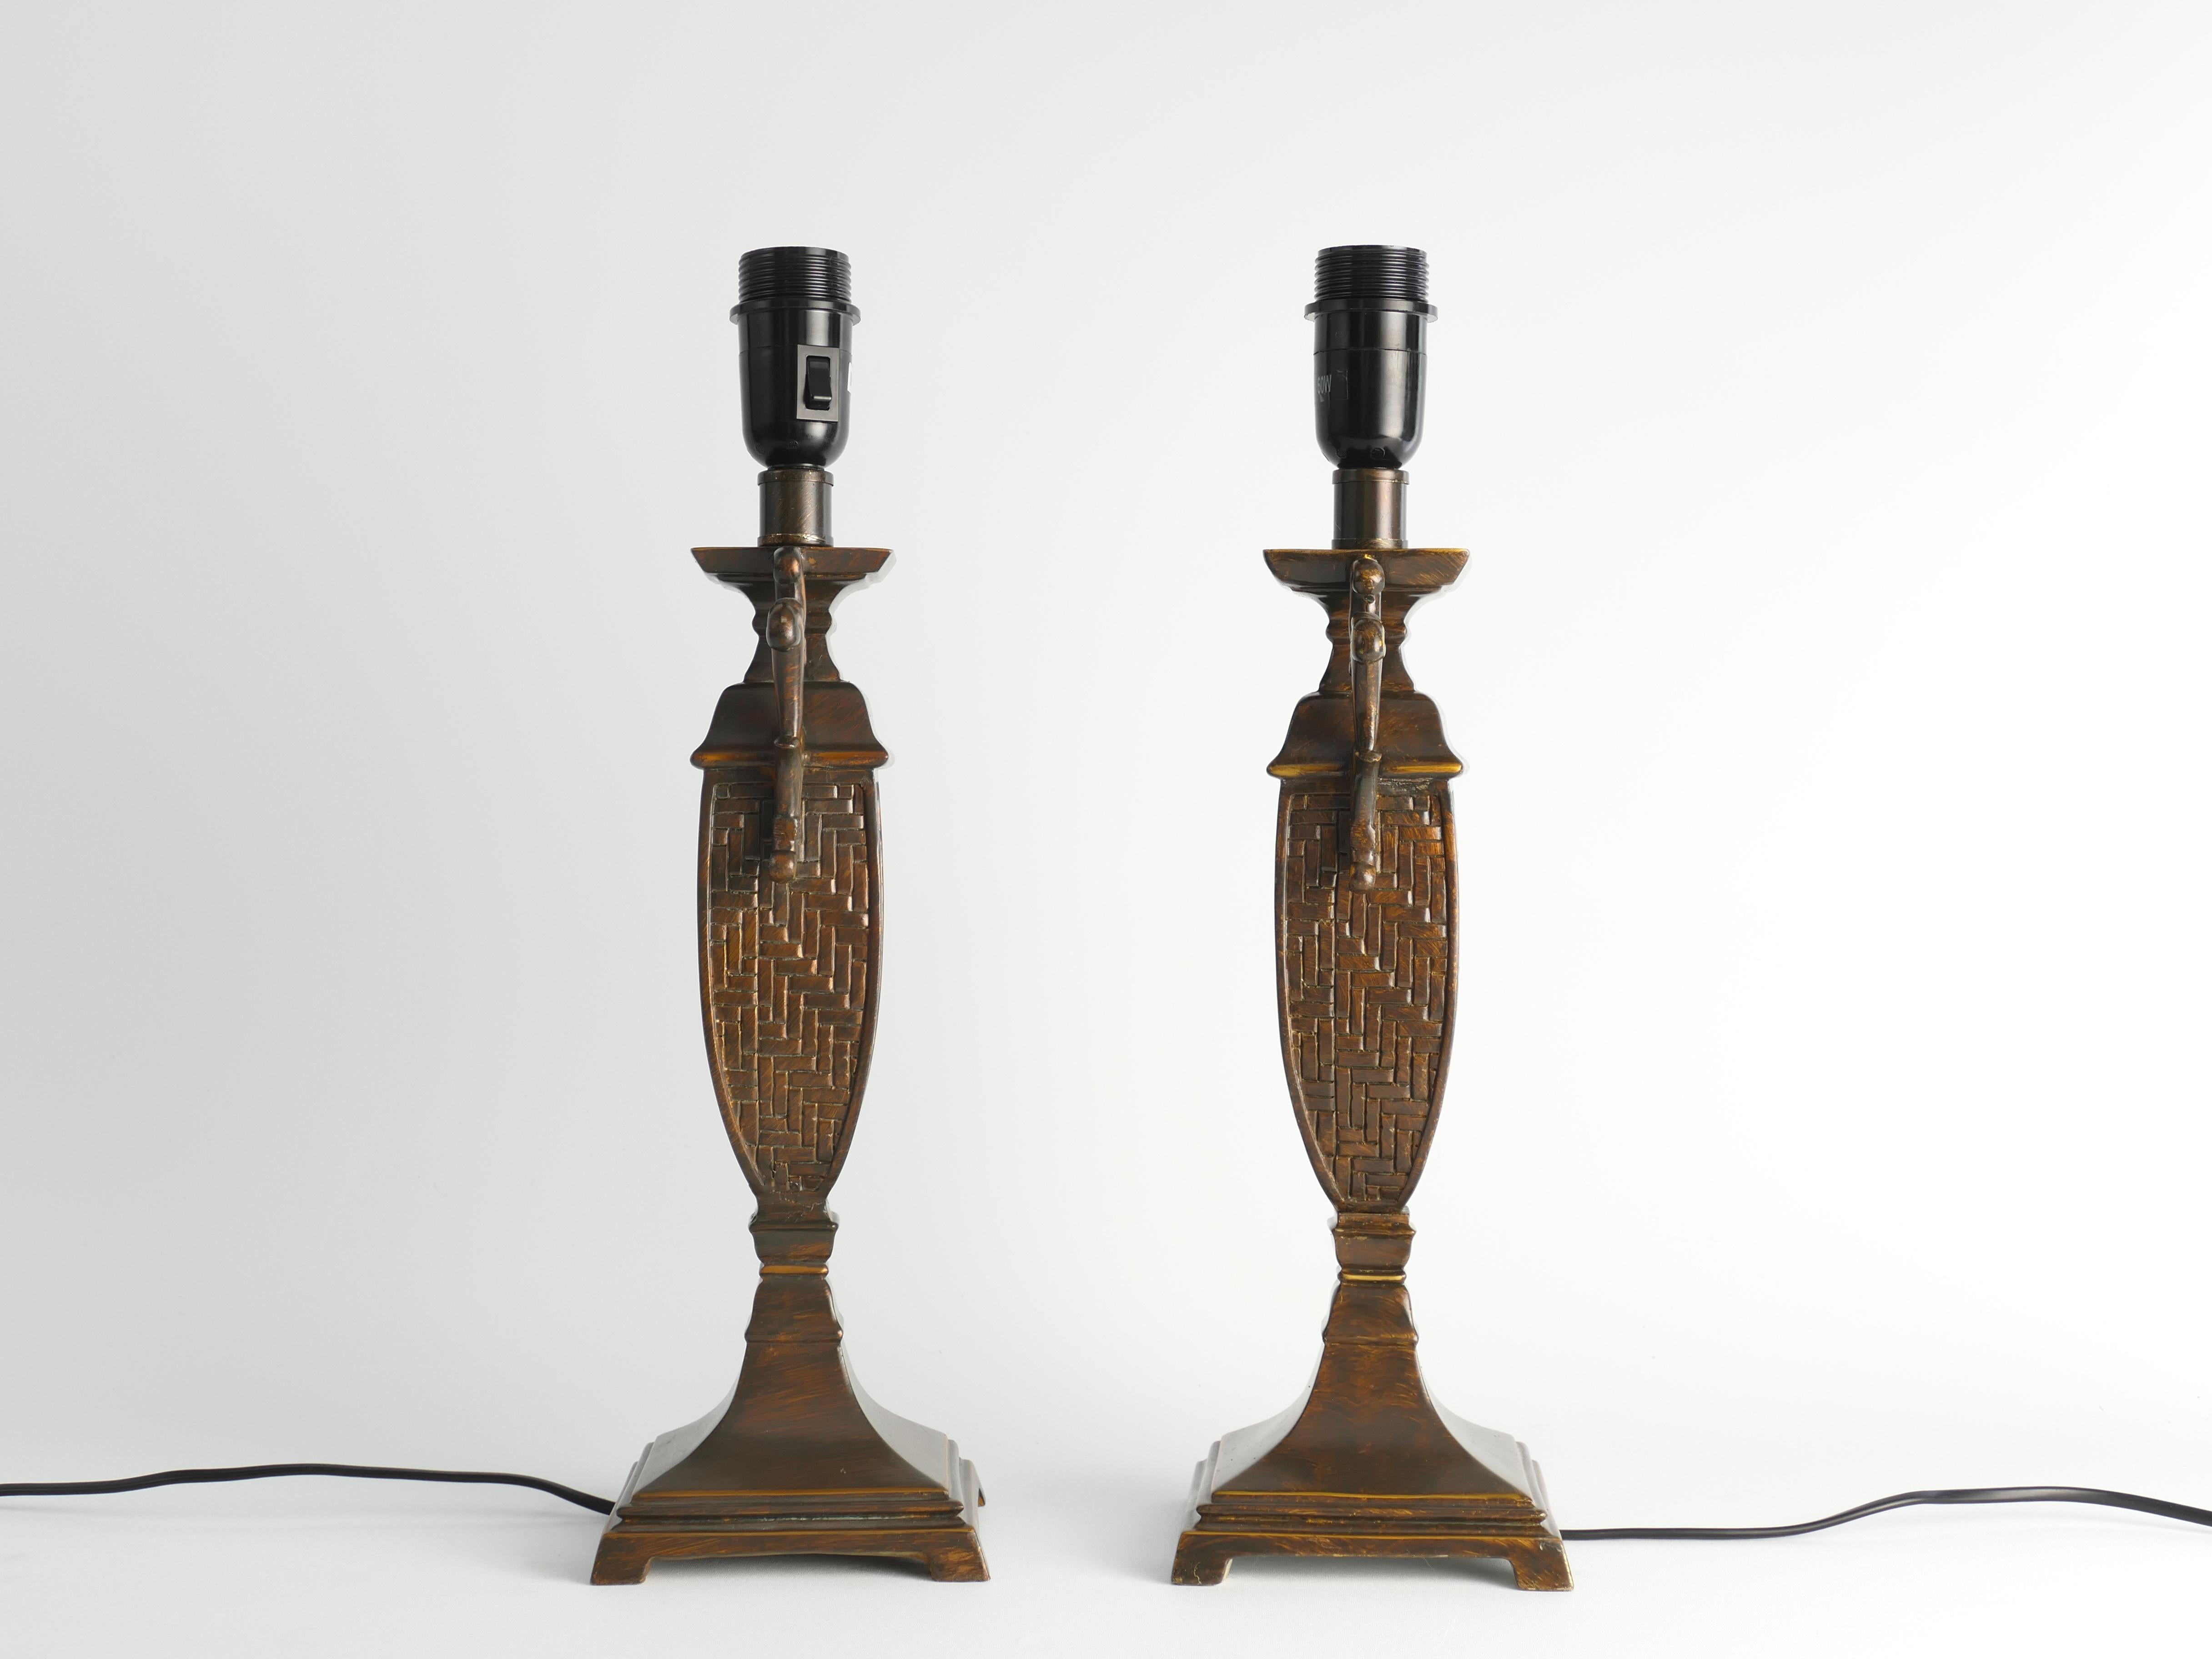 Chinoiserie Faux Rattan Amphora Table Lamps by Aneta, Sweden 1980's In Good Condition For Sale In Grythyttan, SE